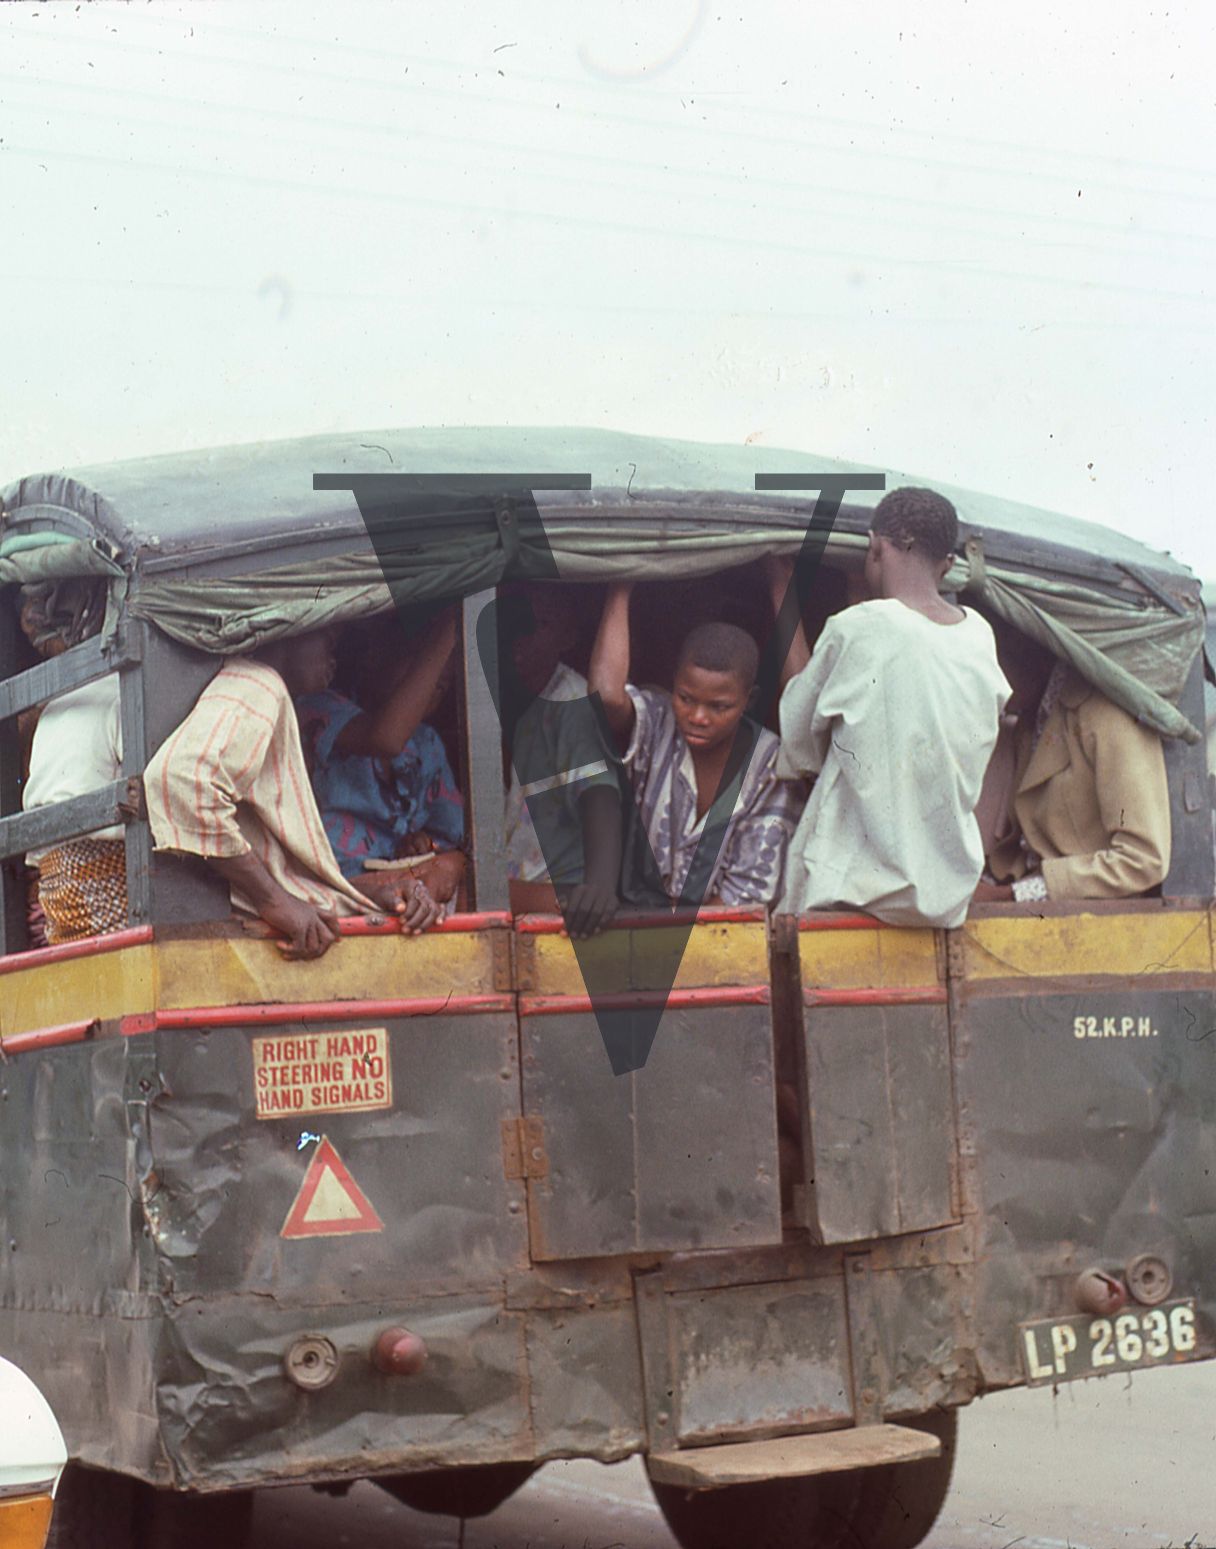 Nigeria, boys in the back of a truck.